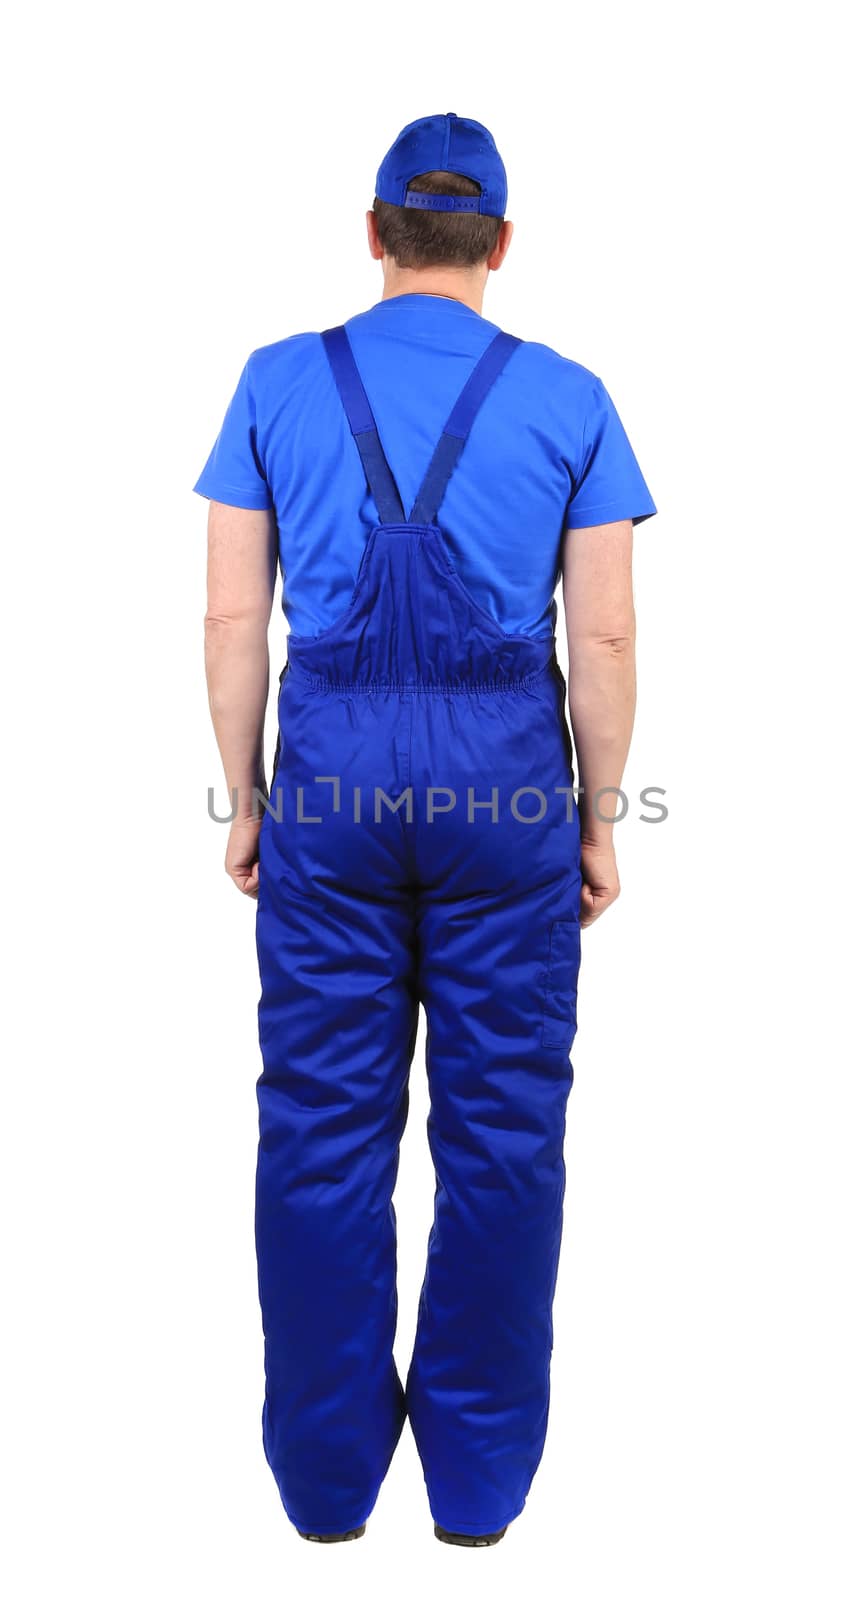 Worker in blue overalls. Back view. by indigolotos